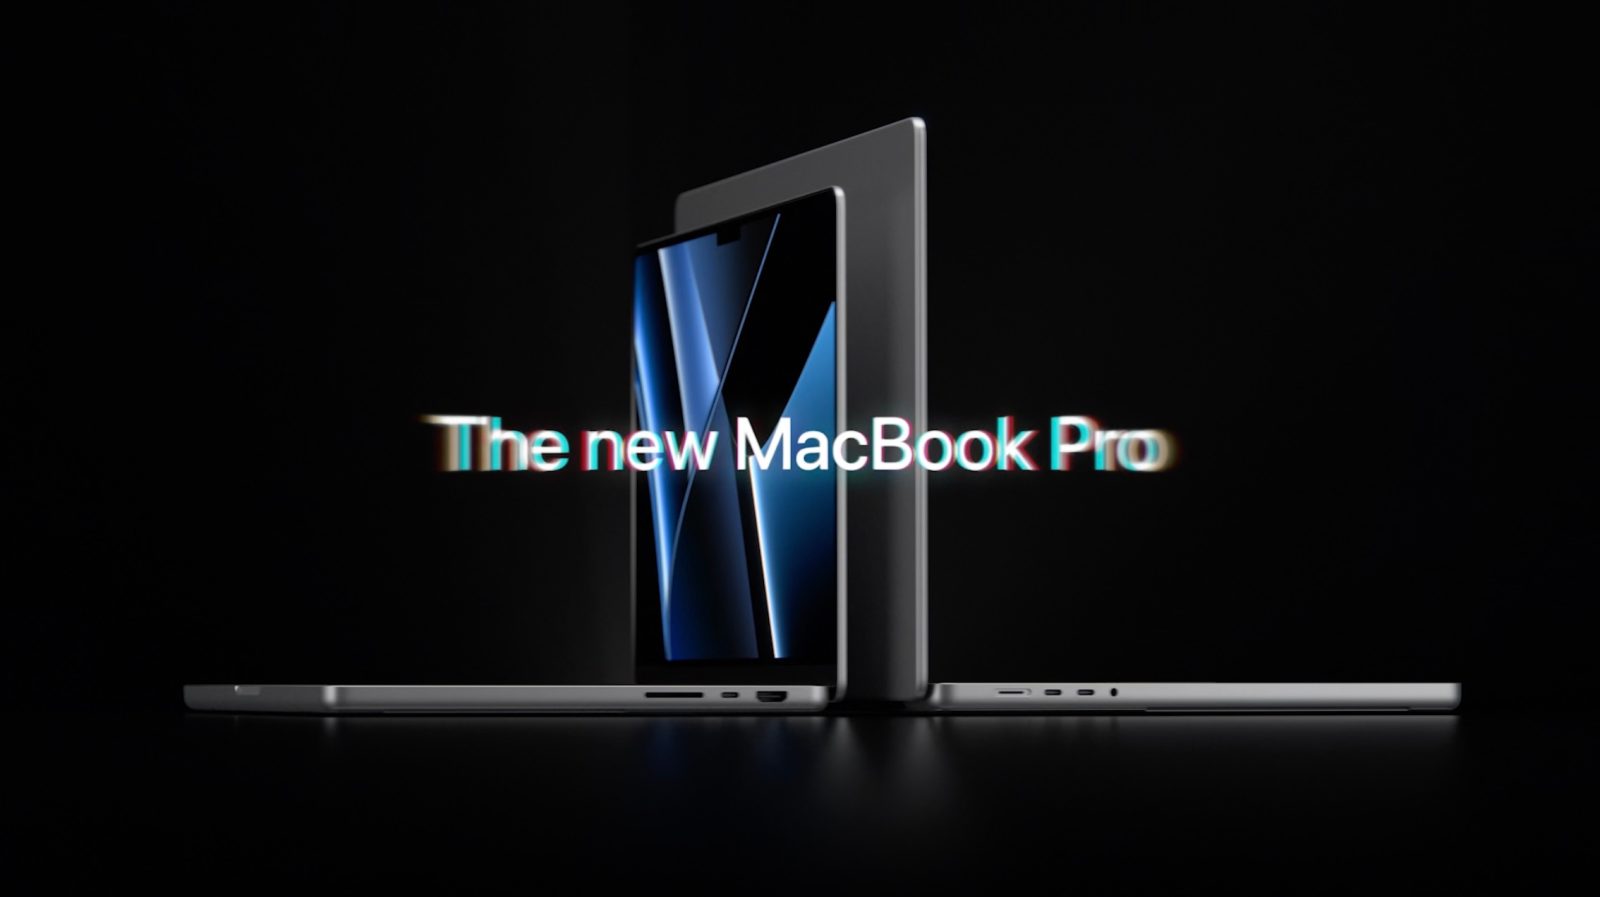 2022 MacBook Pro M2 Max and M2 Pro expectations